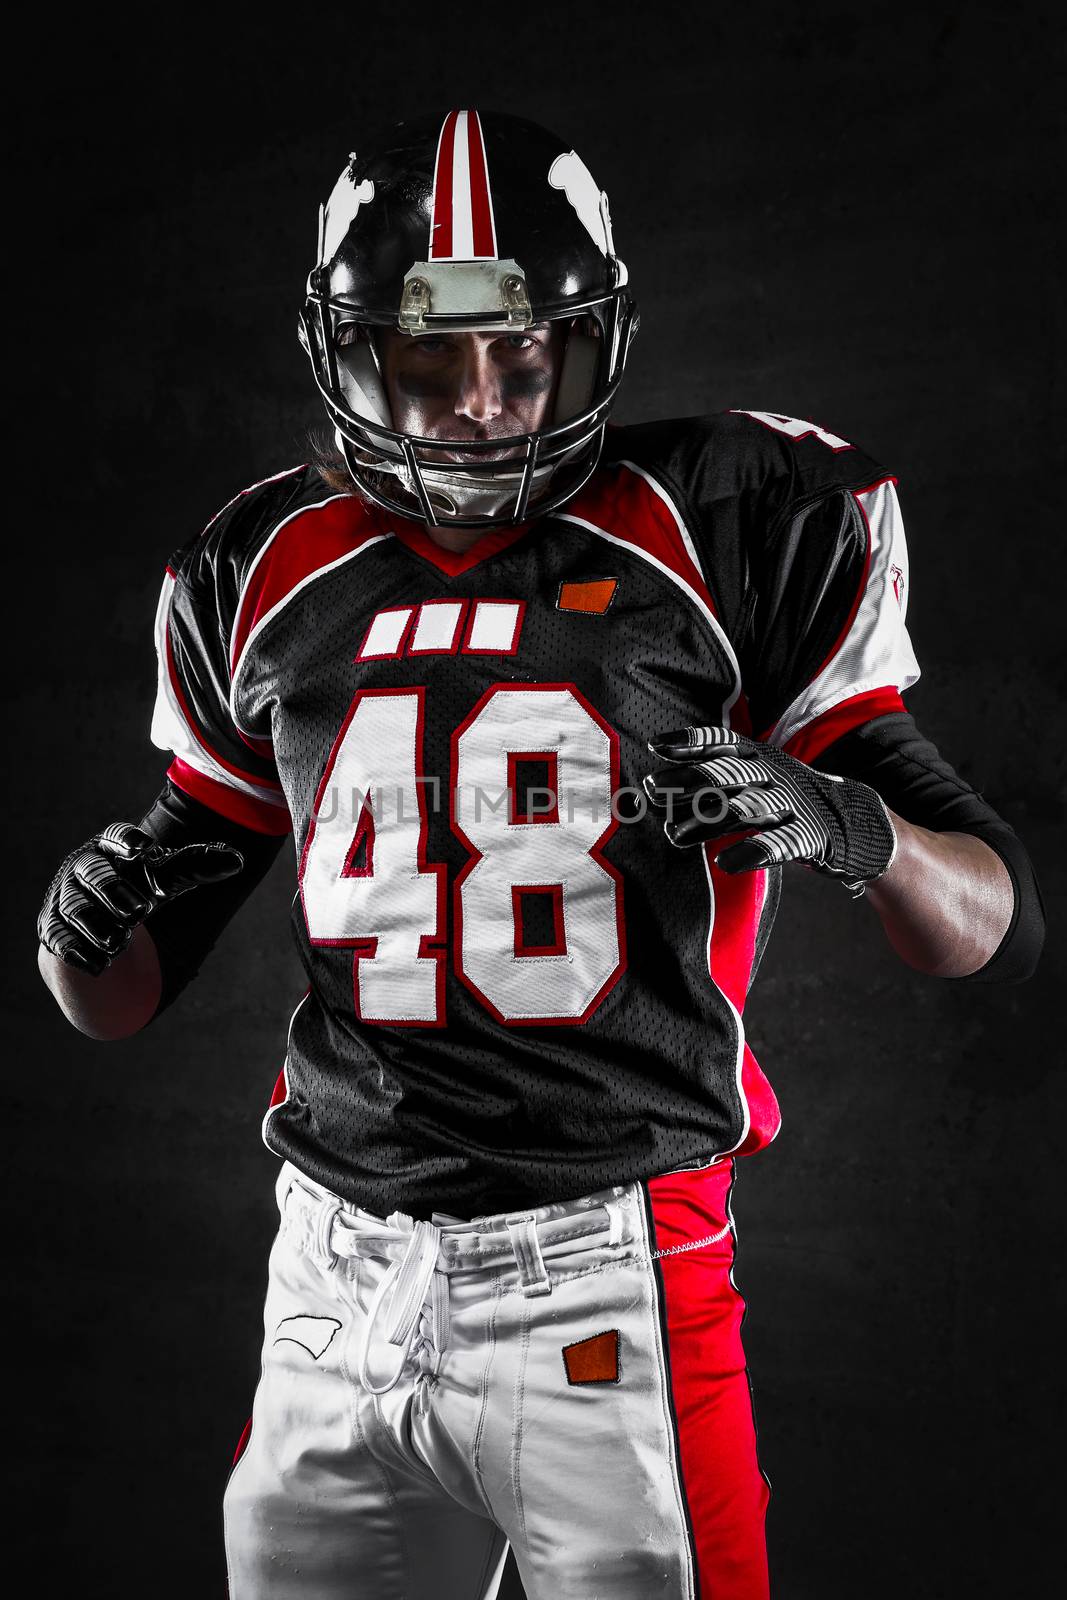 American football player on dark background by alessandroguerriero